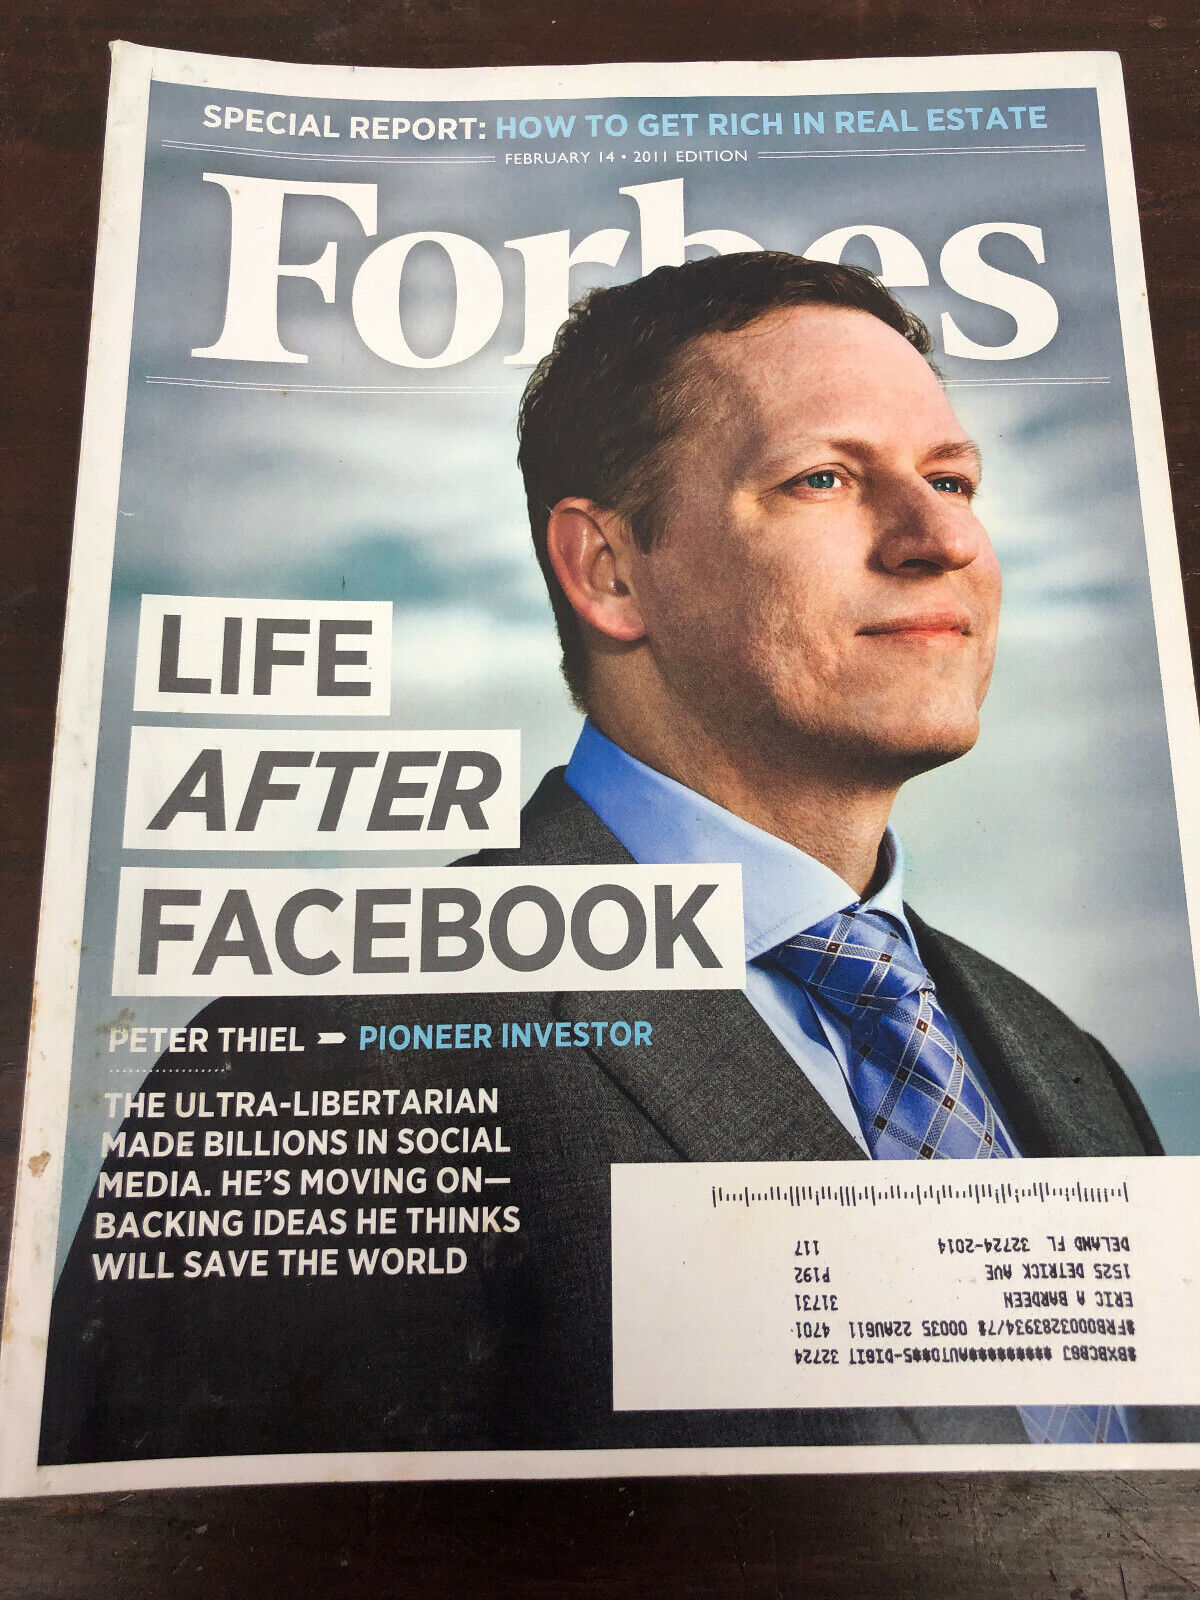 Vintage Forbes february 2011 Magazine Life After Facebook - Peter Thiel